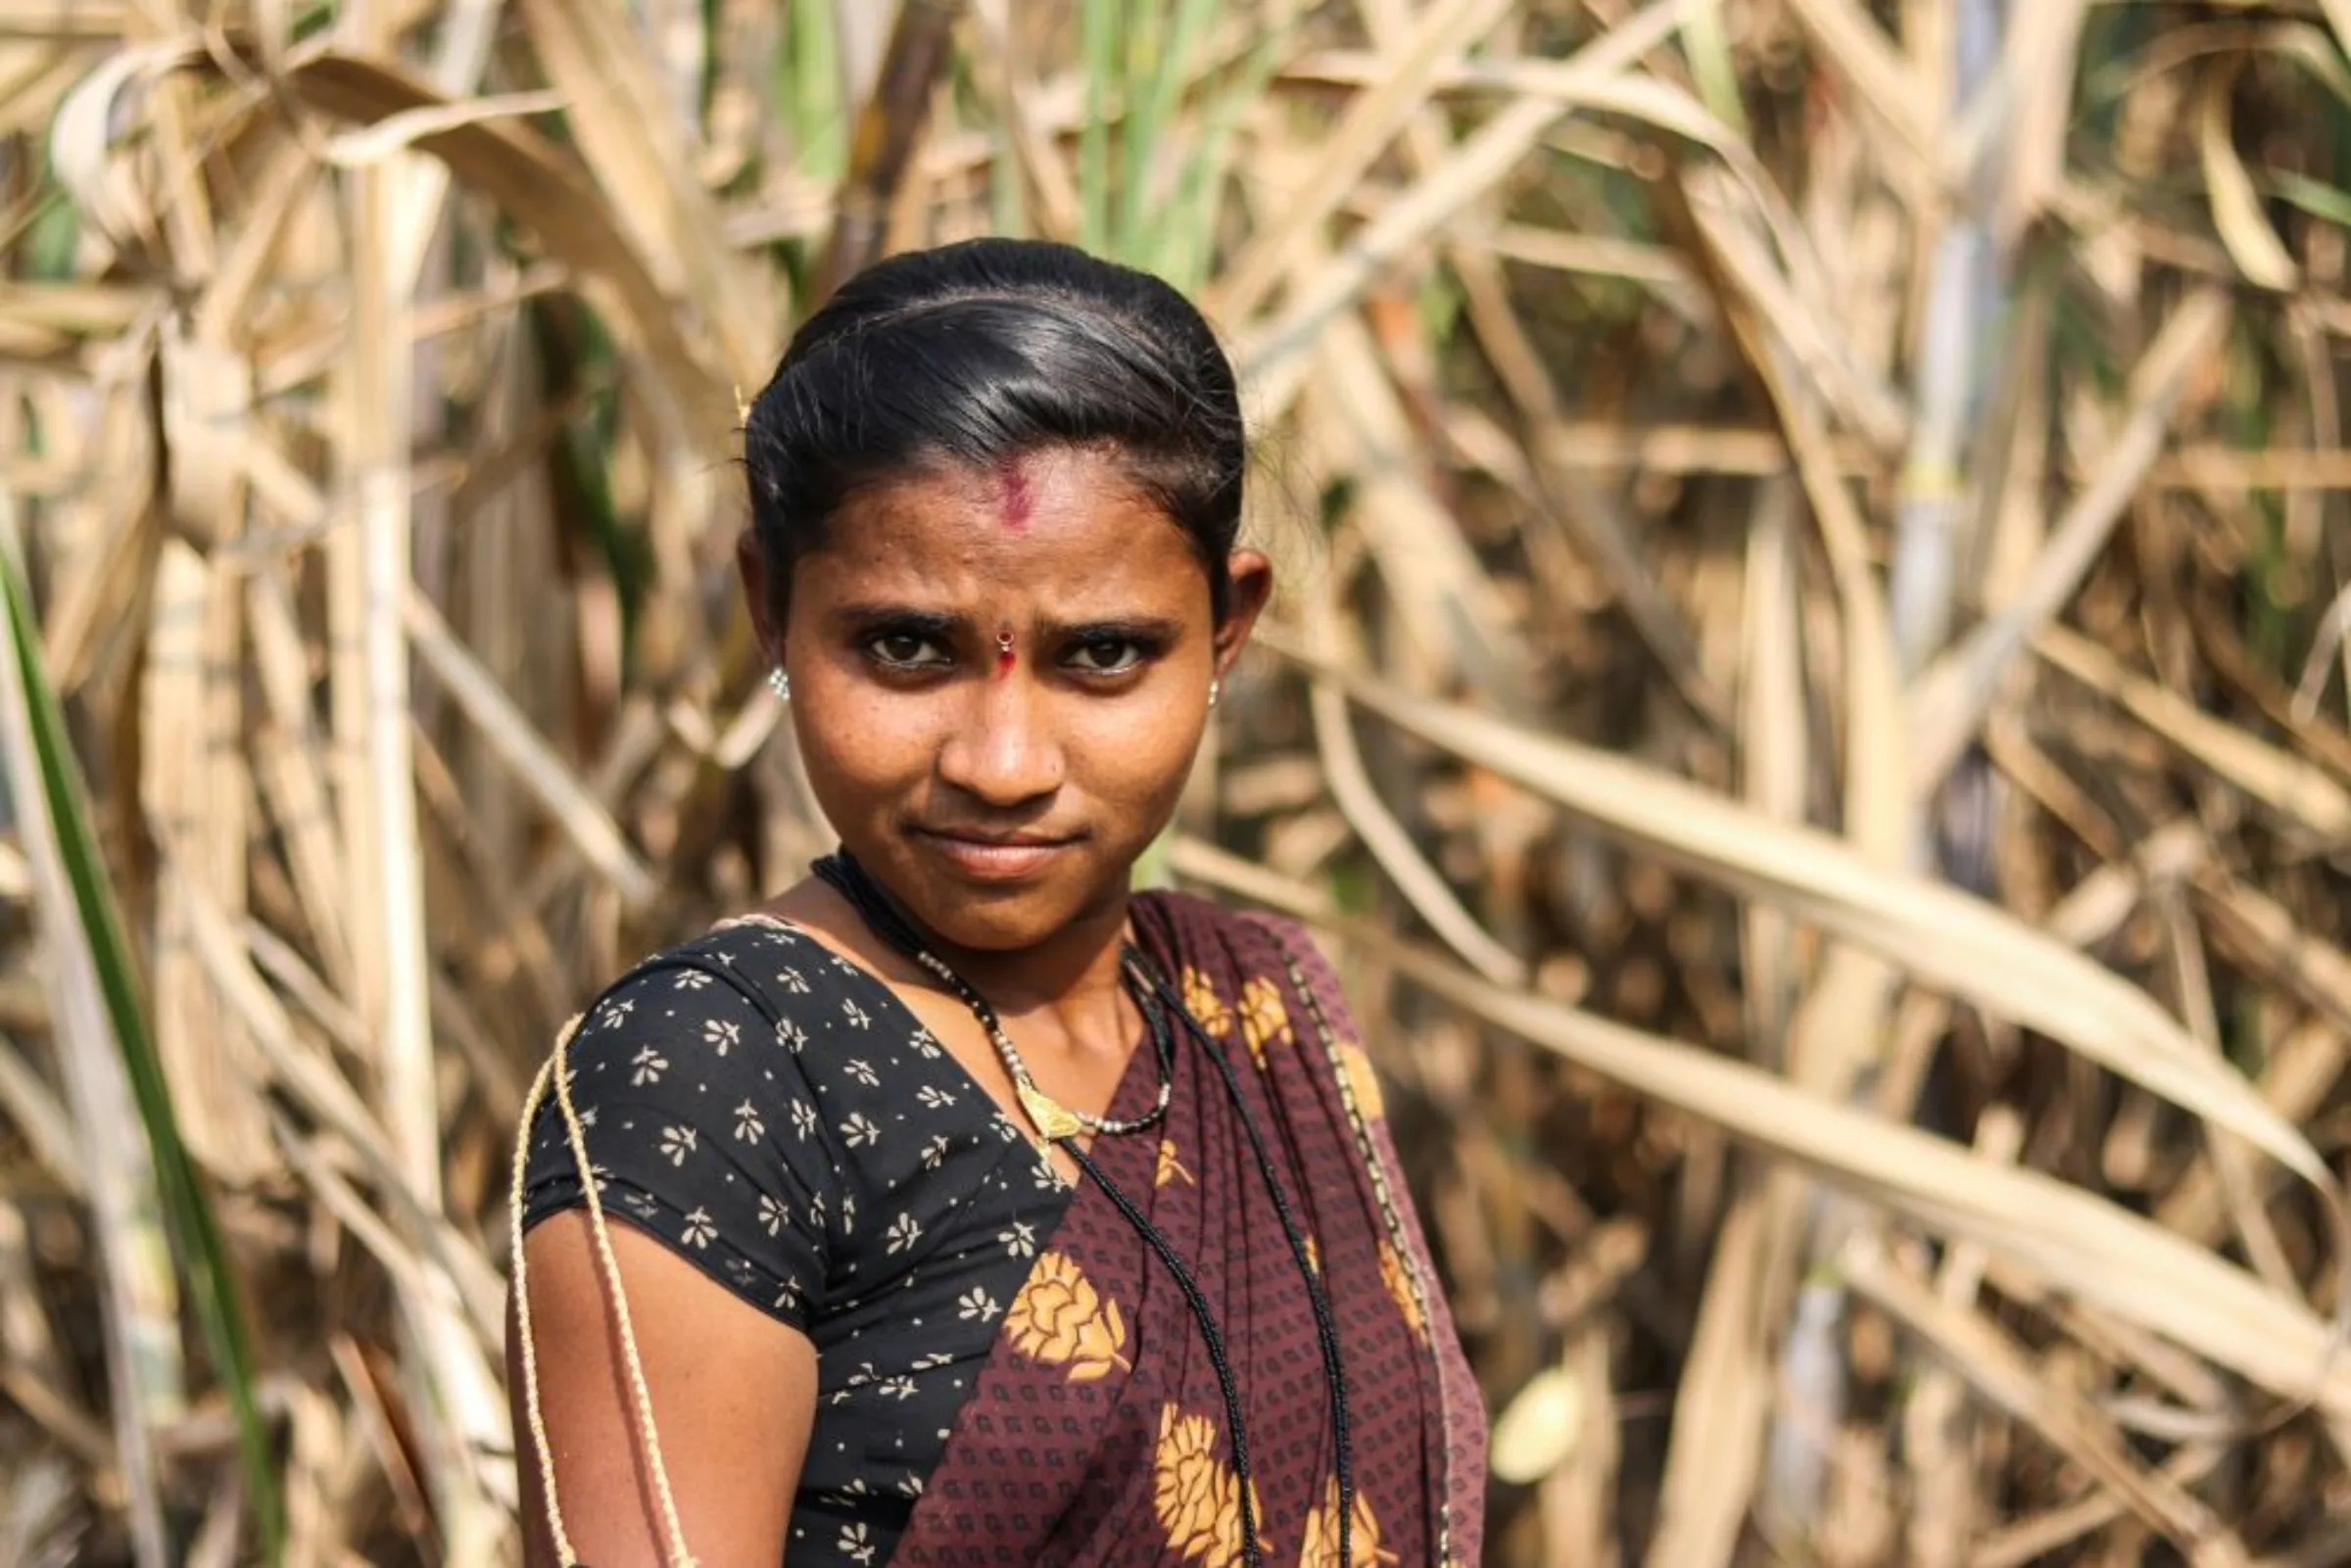 Moni Nave, a sugercane cutter in her early 20s poses for a picture in the sugarcane fields in Maharashtra’s Khochi village, India, which is over 600 kilometres (372 miles) from her village. December 17, 2022. Sanket Jain/Thomson Reuters Foundation